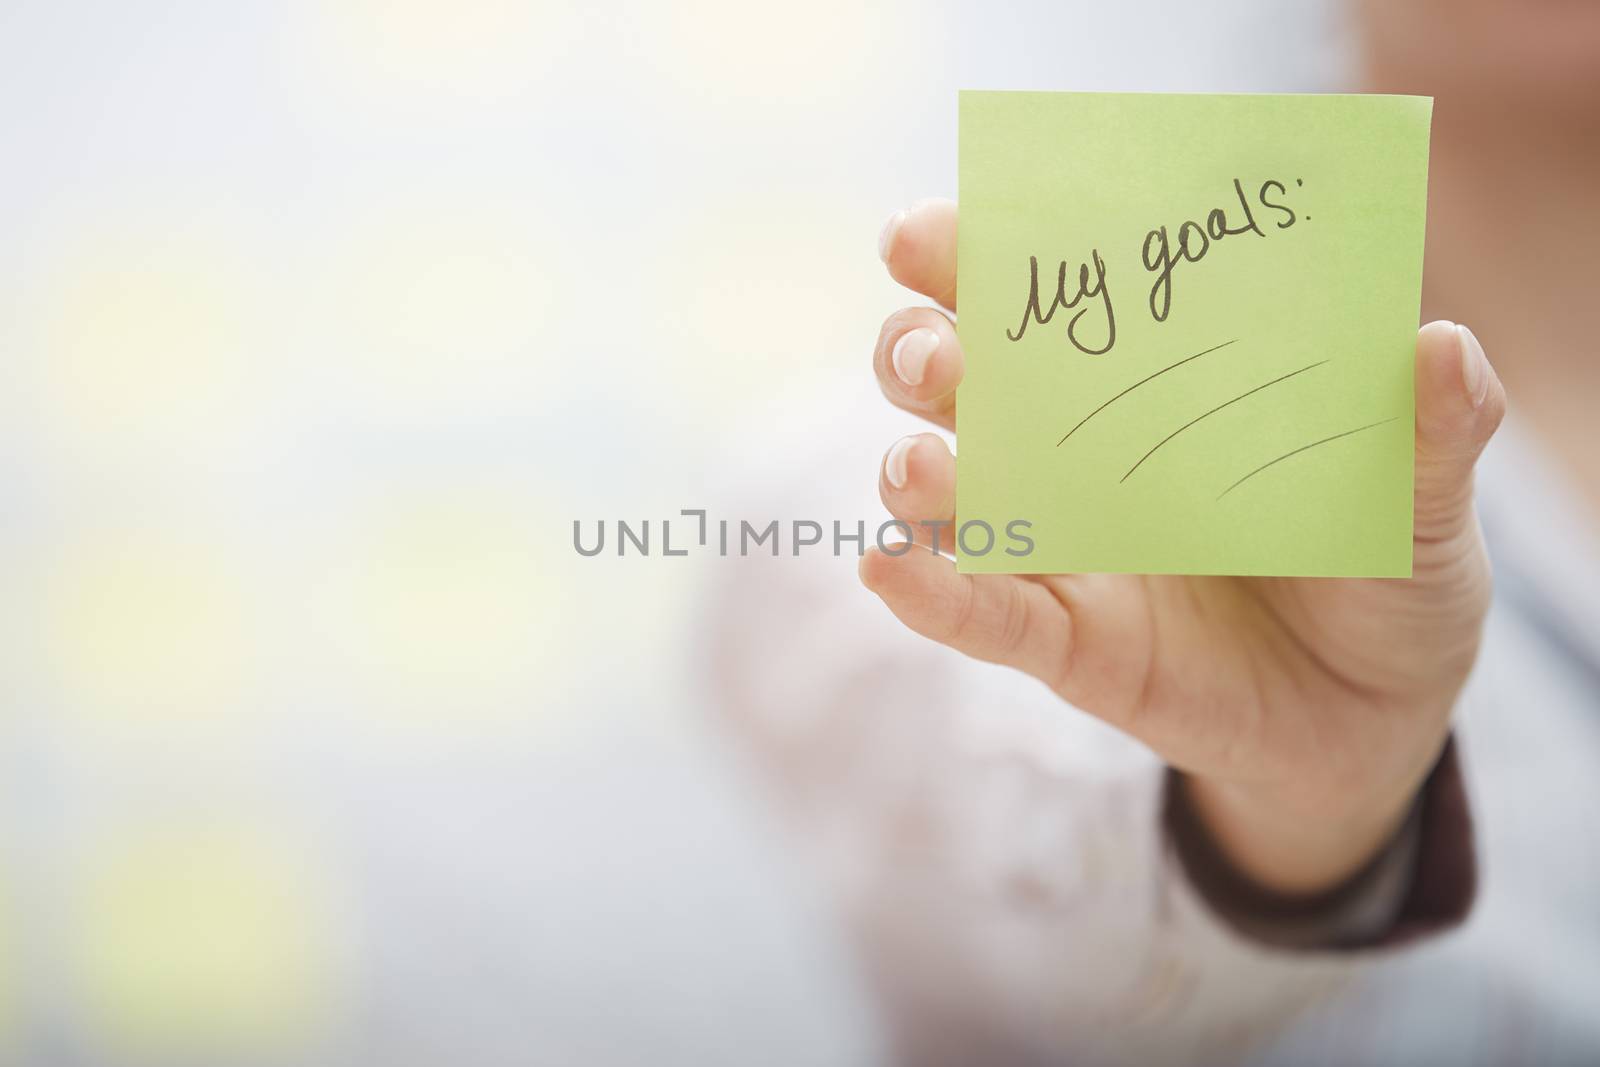 My goals planning by Novic